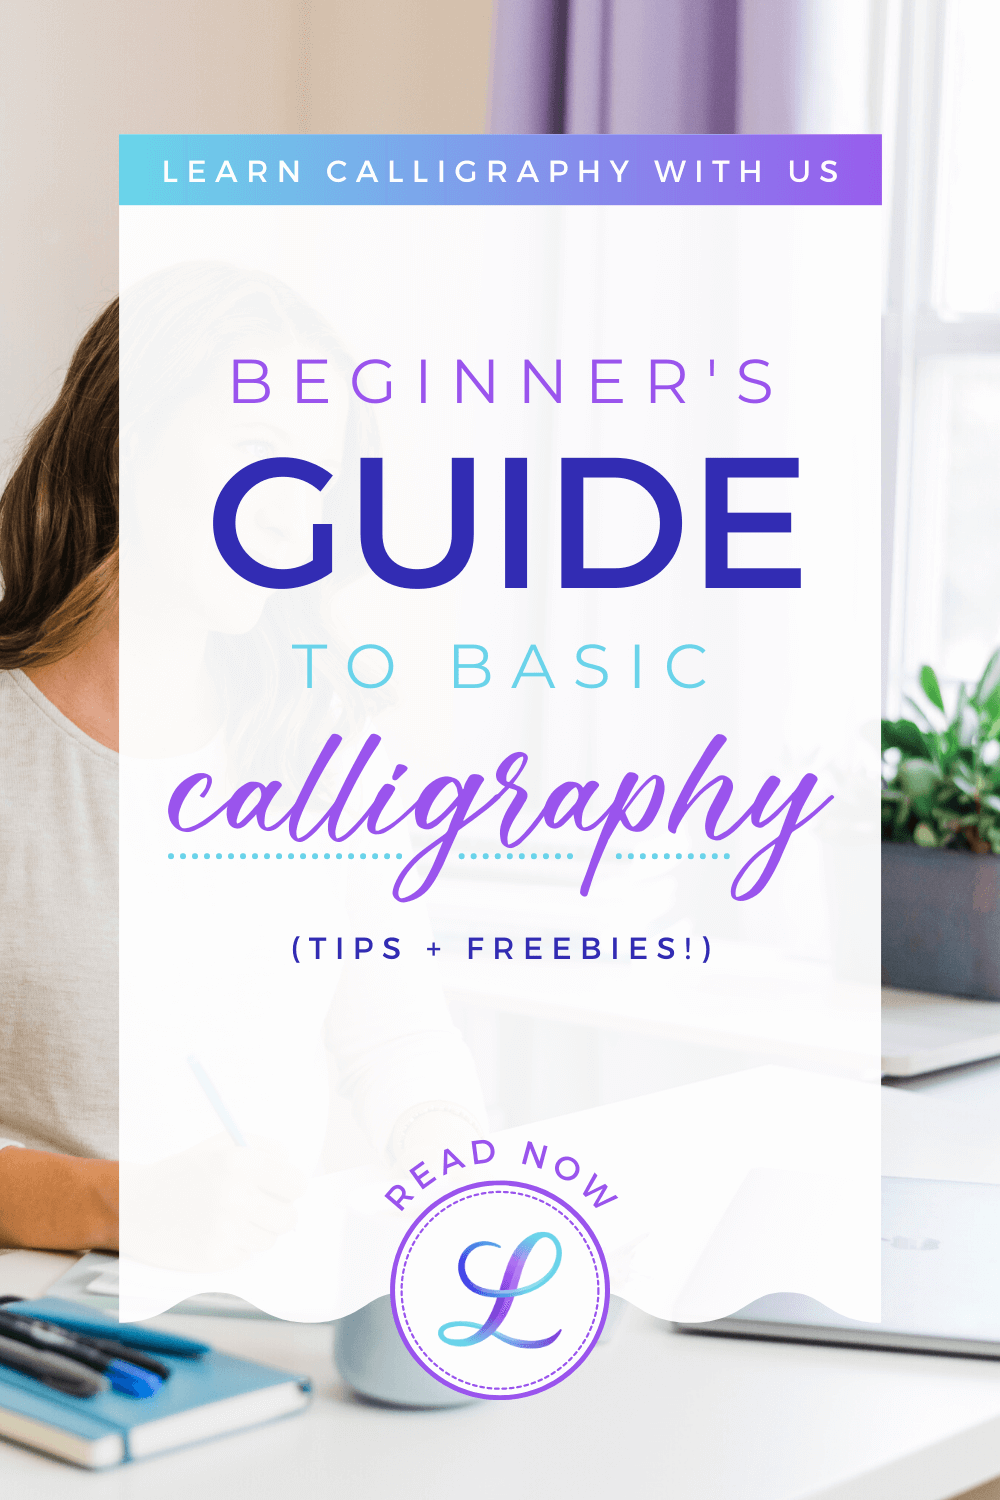 Calligraphy 101: The Ultimate Guide for Calligraphy Beginners